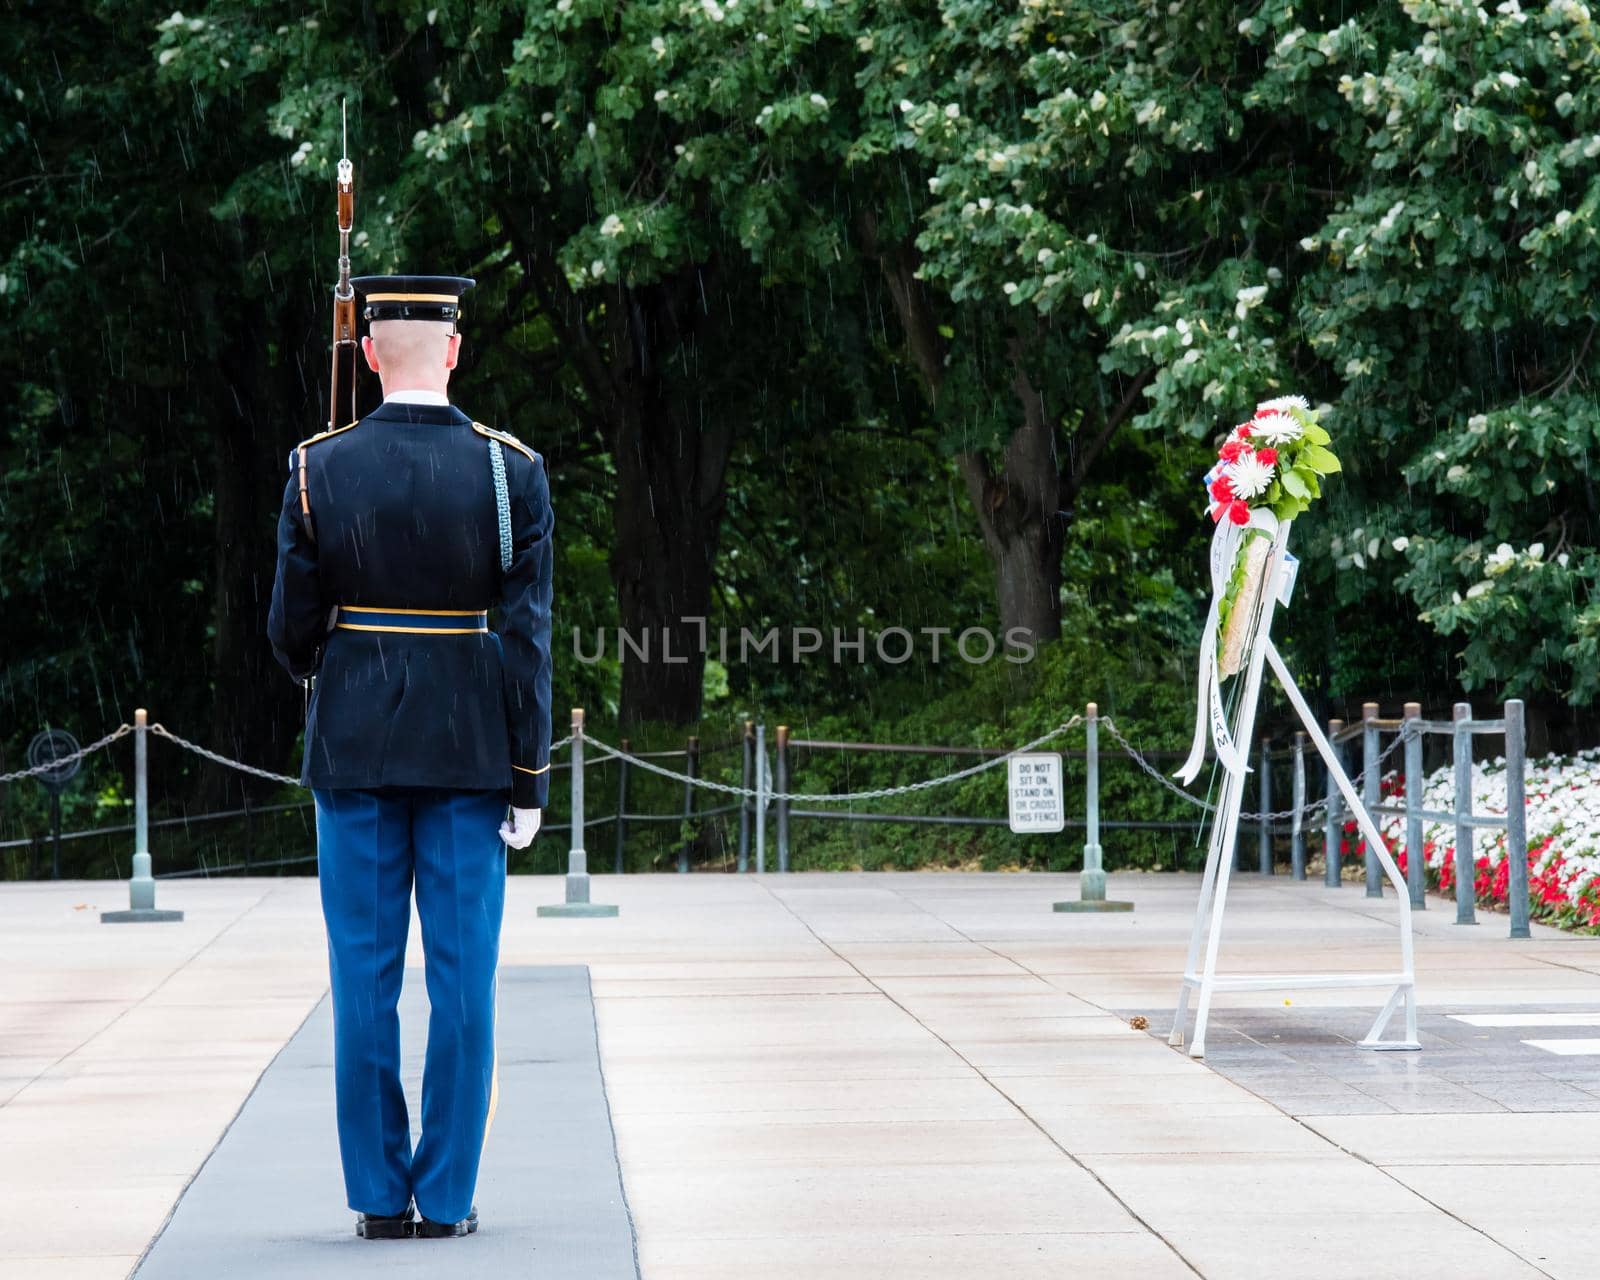 Ceremony at the Tomb of the Unknown soldier in Arlington, VA cadet from. the back